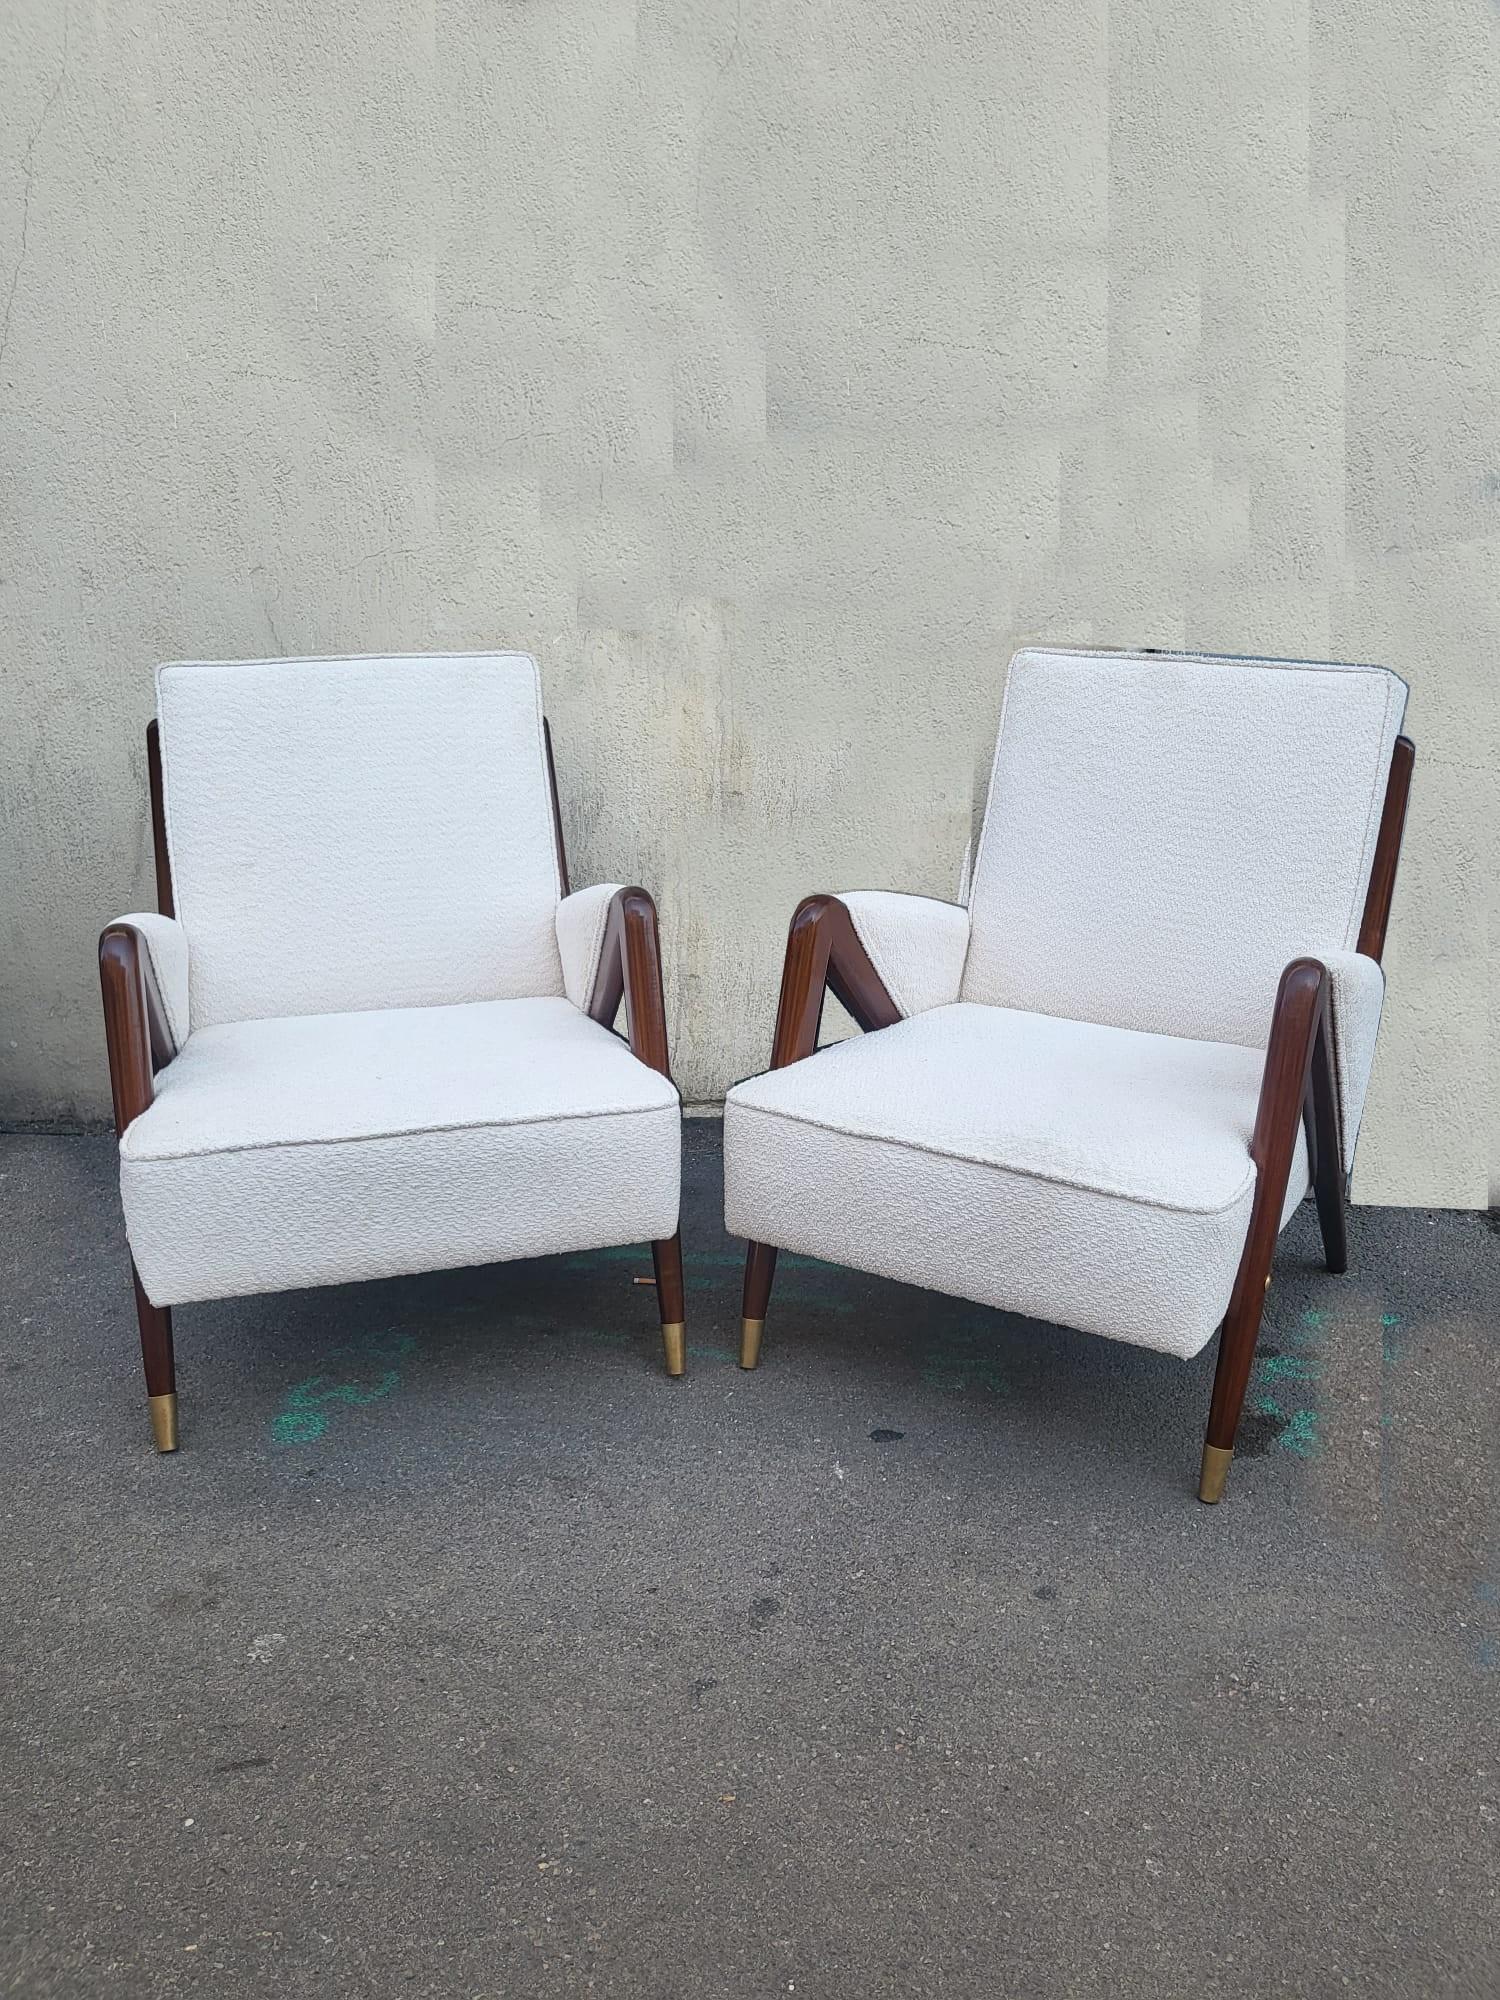 Mid-20th Century Pair Of Armchairs, Design From The 1950s/1960s